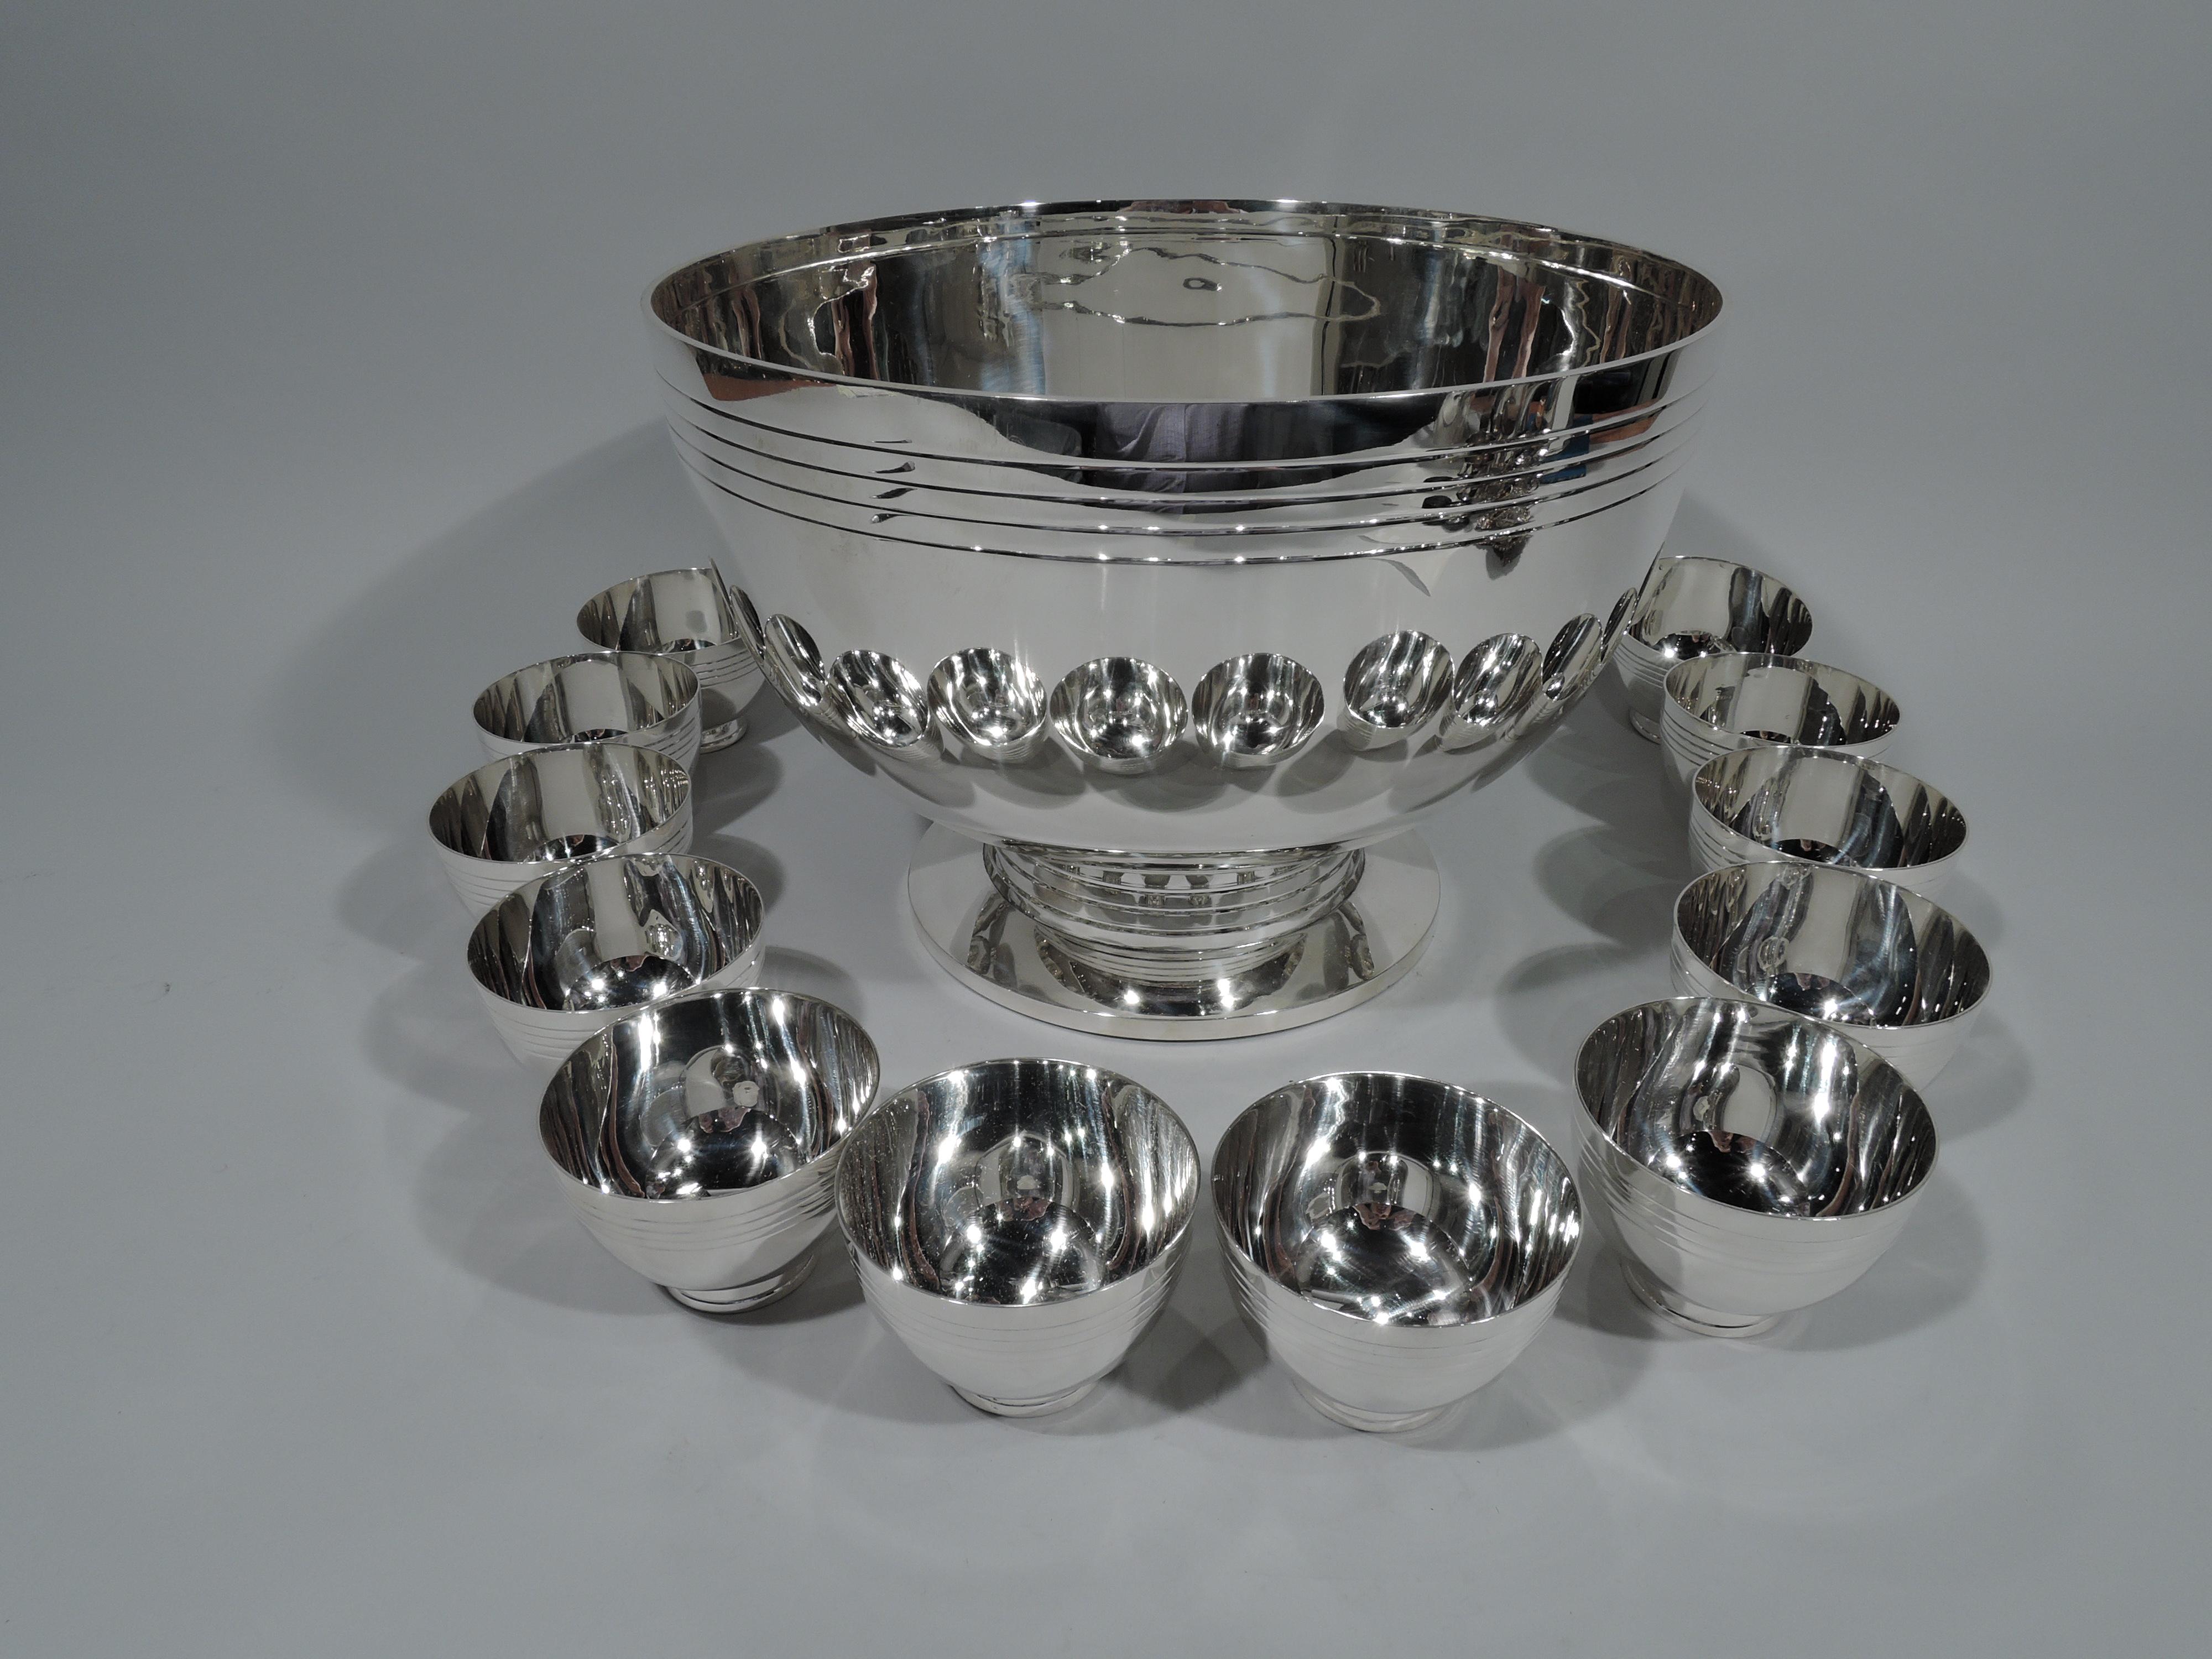 Exciting Mid-Century Modern sterling silver punchbowl and 12 cups. Made by Tiffany & Co. in New York. Punchbowl: Curved sides on inset support mounted to large and flat foot. Incised bands at rim and support. Each cup: Curved bowl on spread and